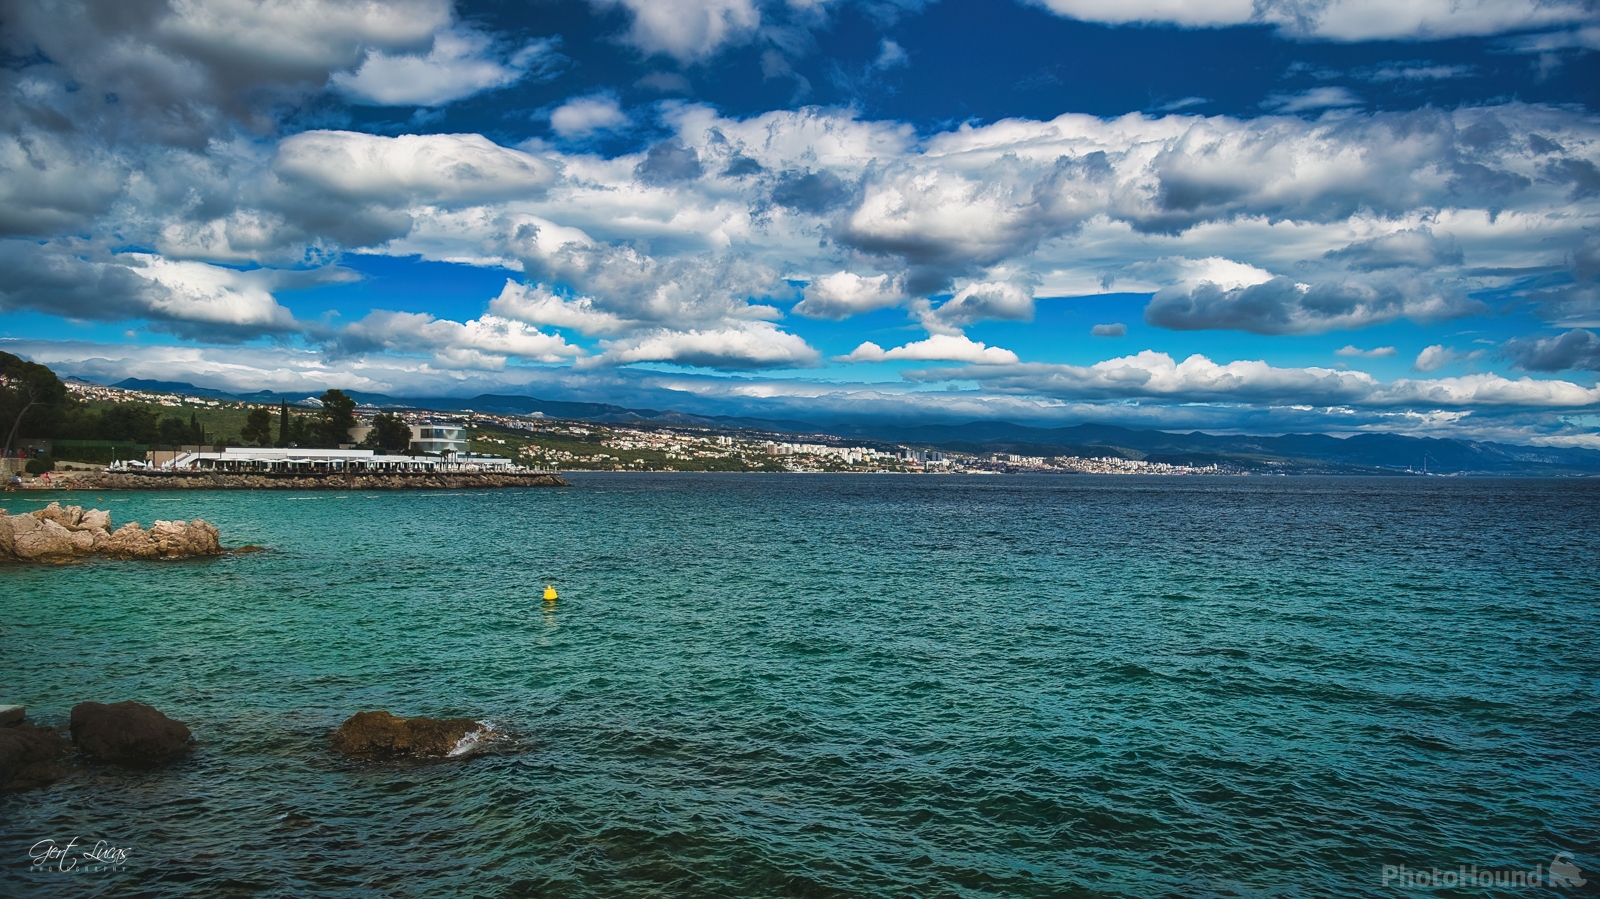 Image of The Lungomare (Hotel Kvarner Views) by Gert Lucas